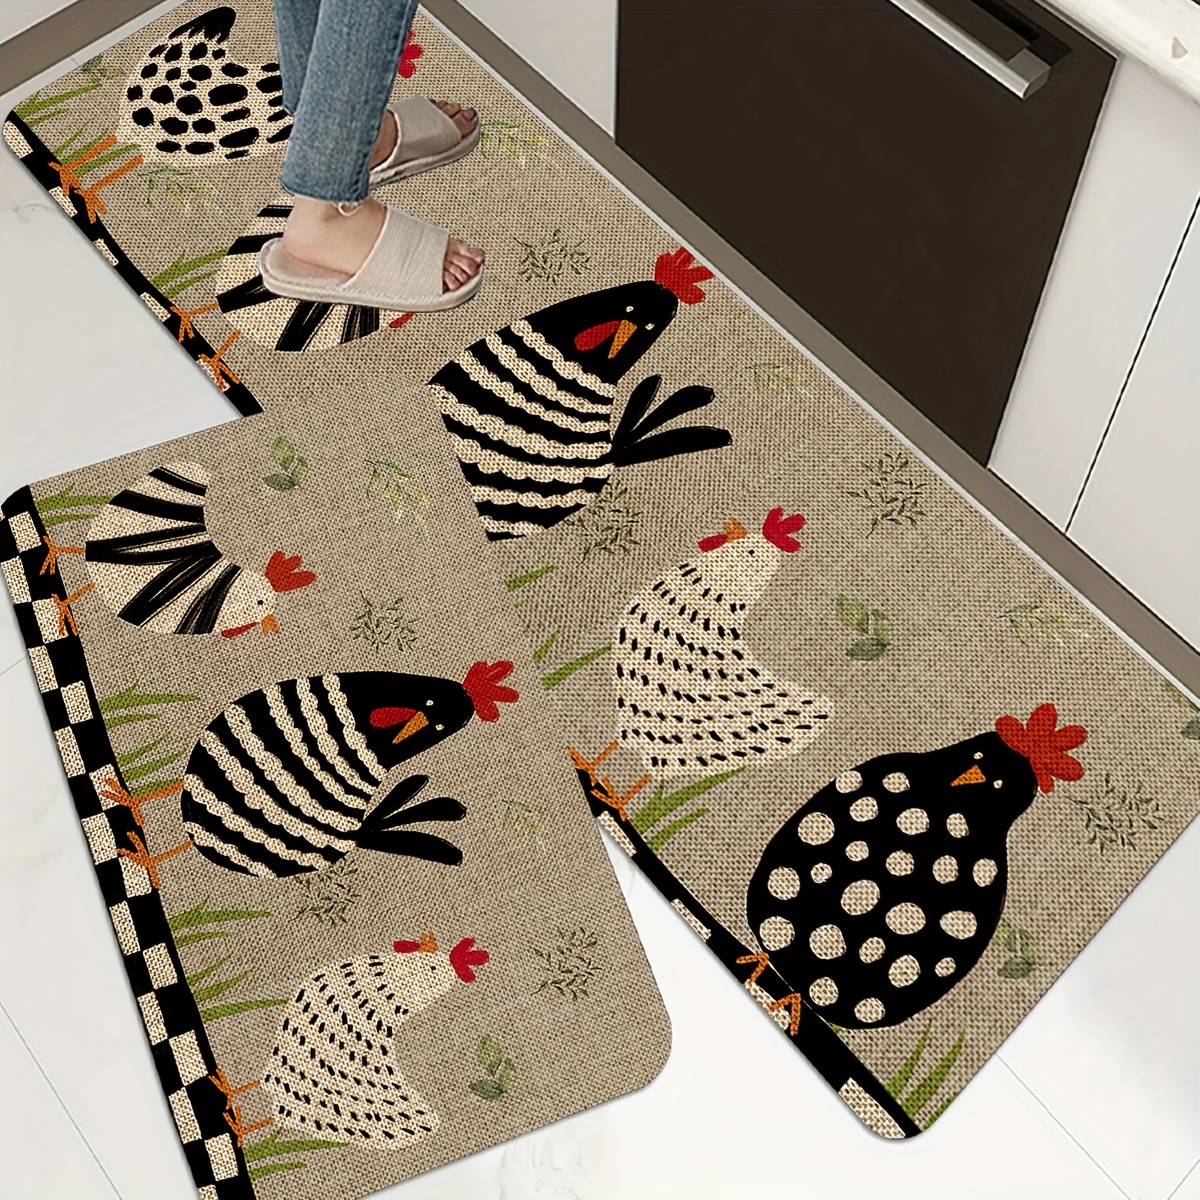 2 Pieces 3D Wine Decor Themed Kitchen Mats and Rug Set Kitchen